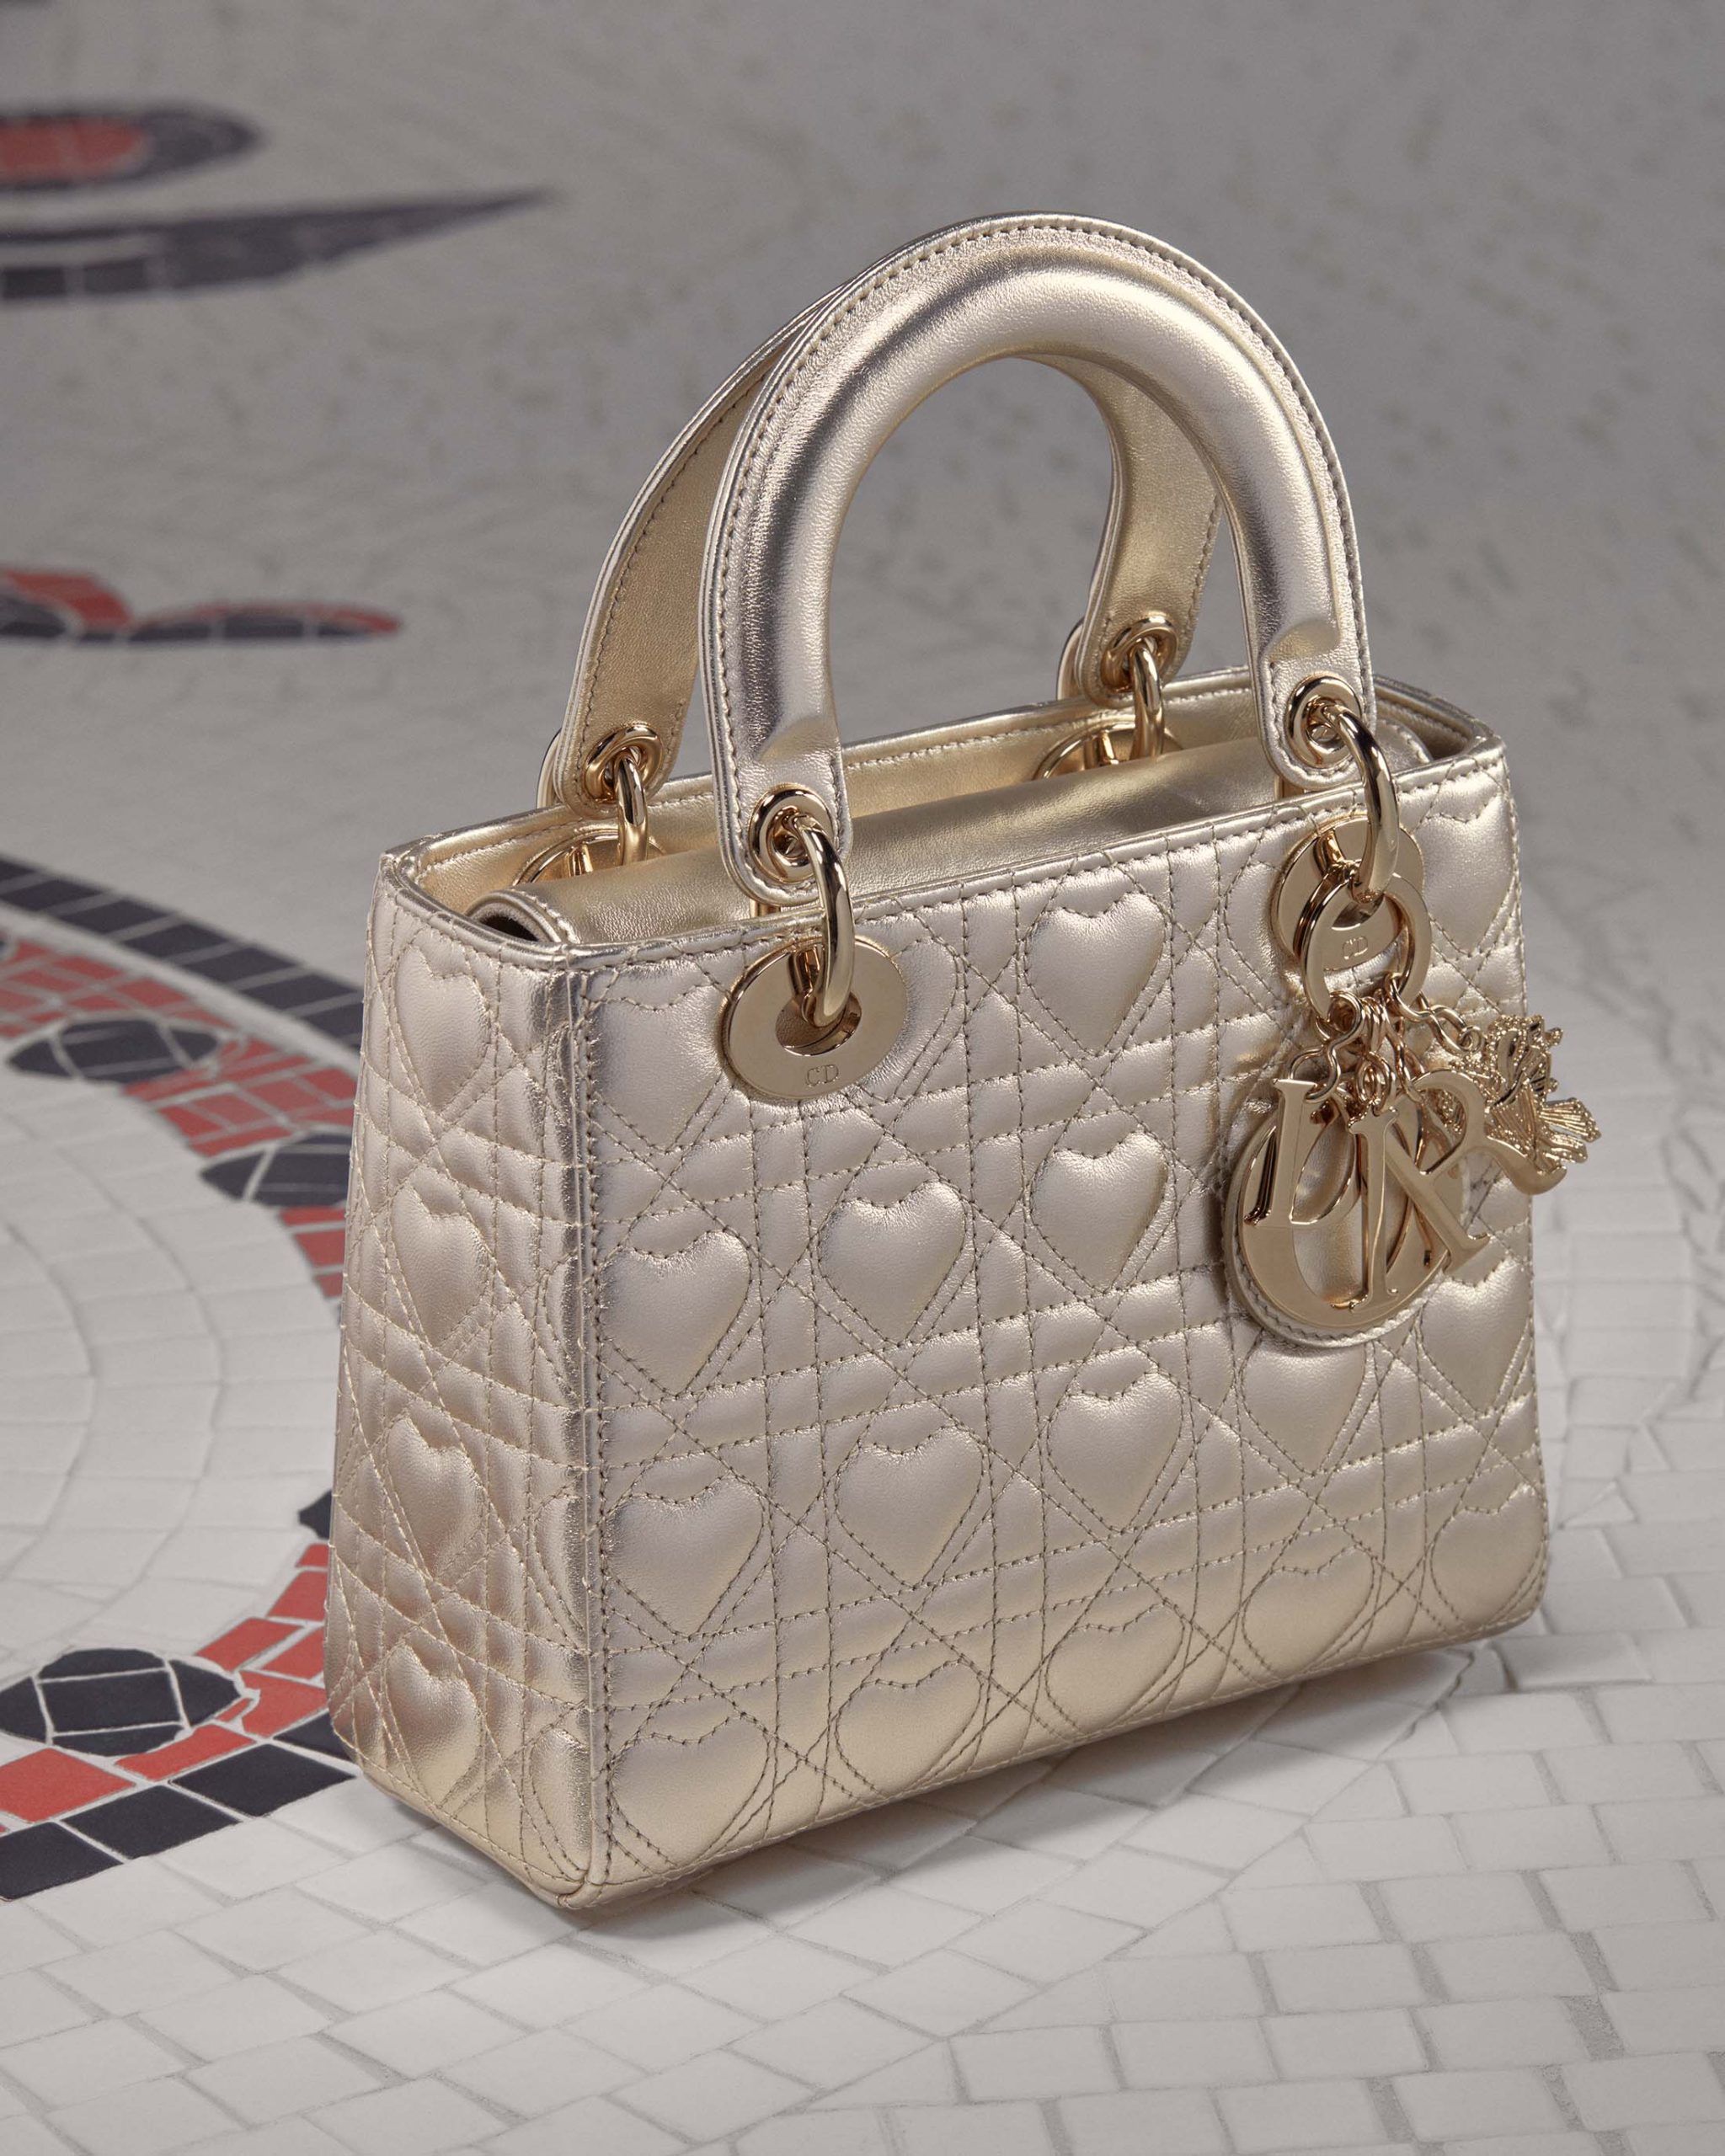 Dior's Cupidon Capsule Collection